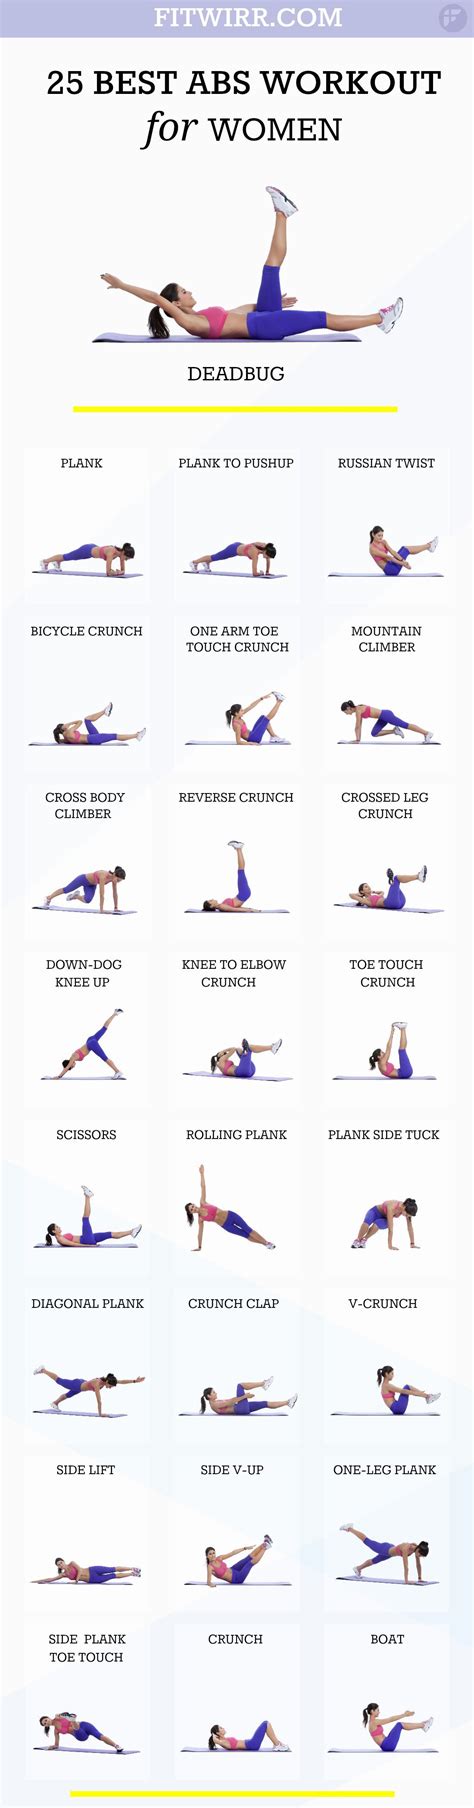 25 Best Ab Workouts For Women Top Ab Exercises For 2018 Exercises